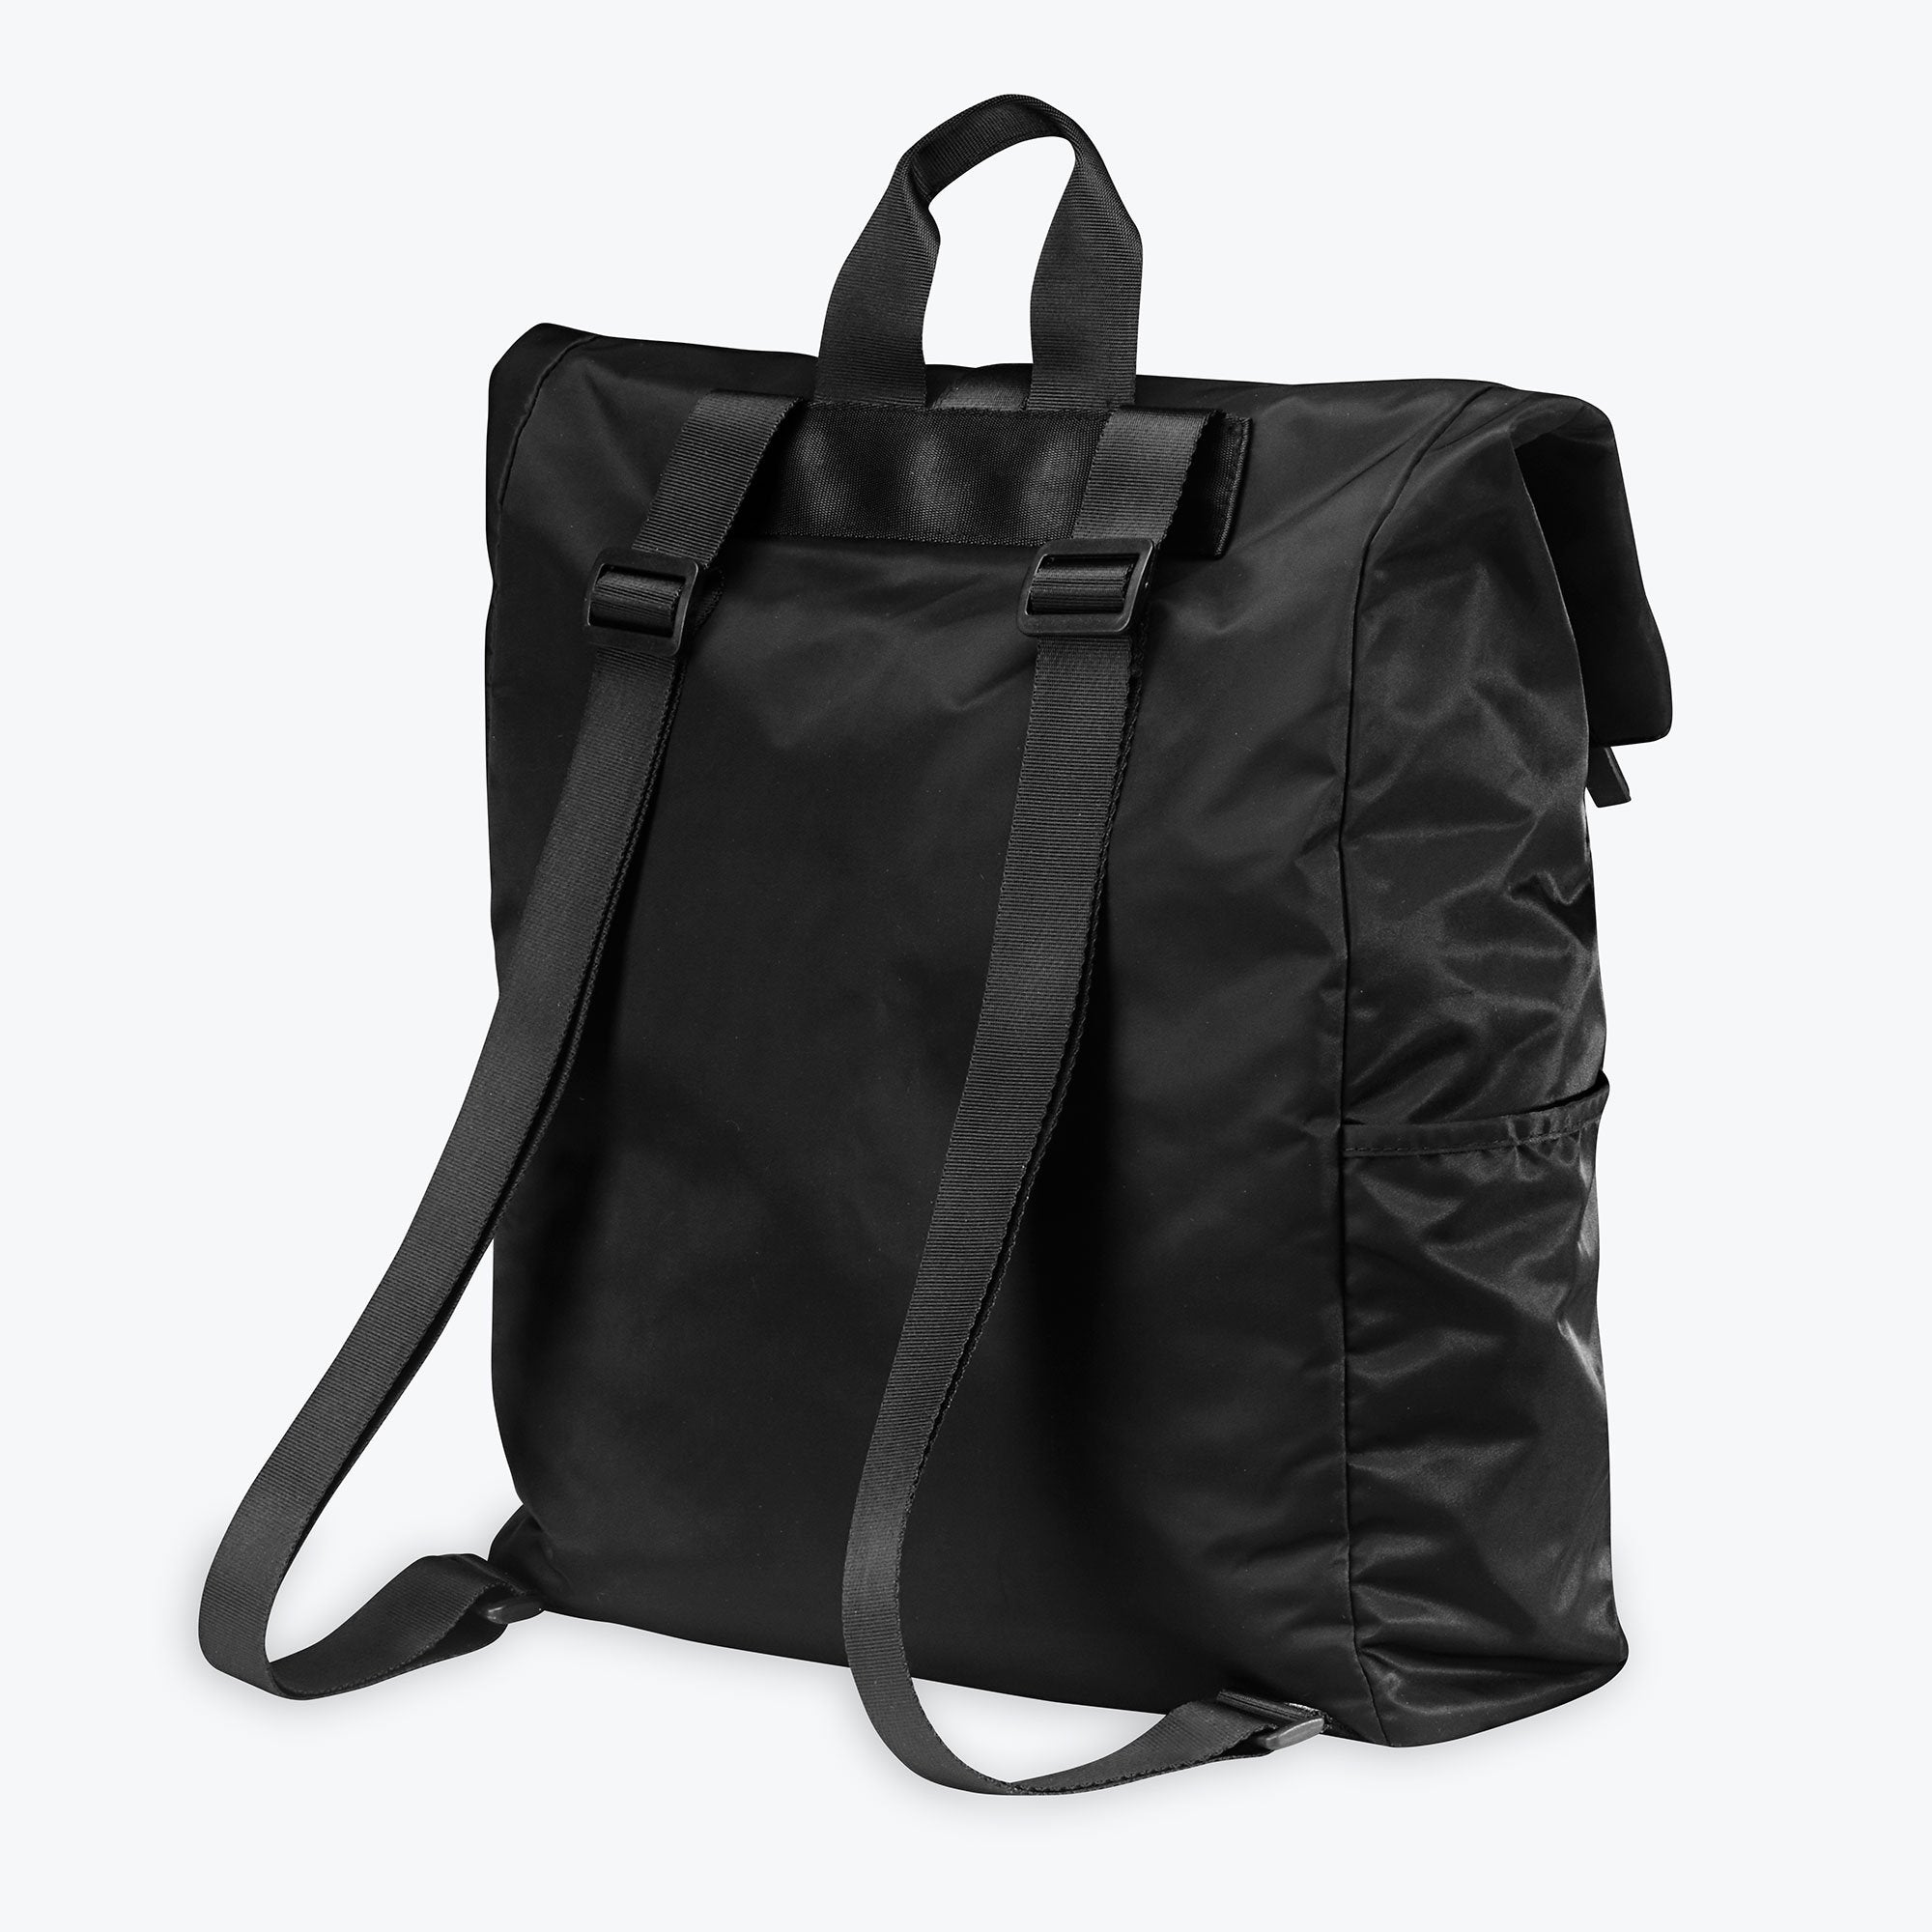 Hold-Everything Backpack